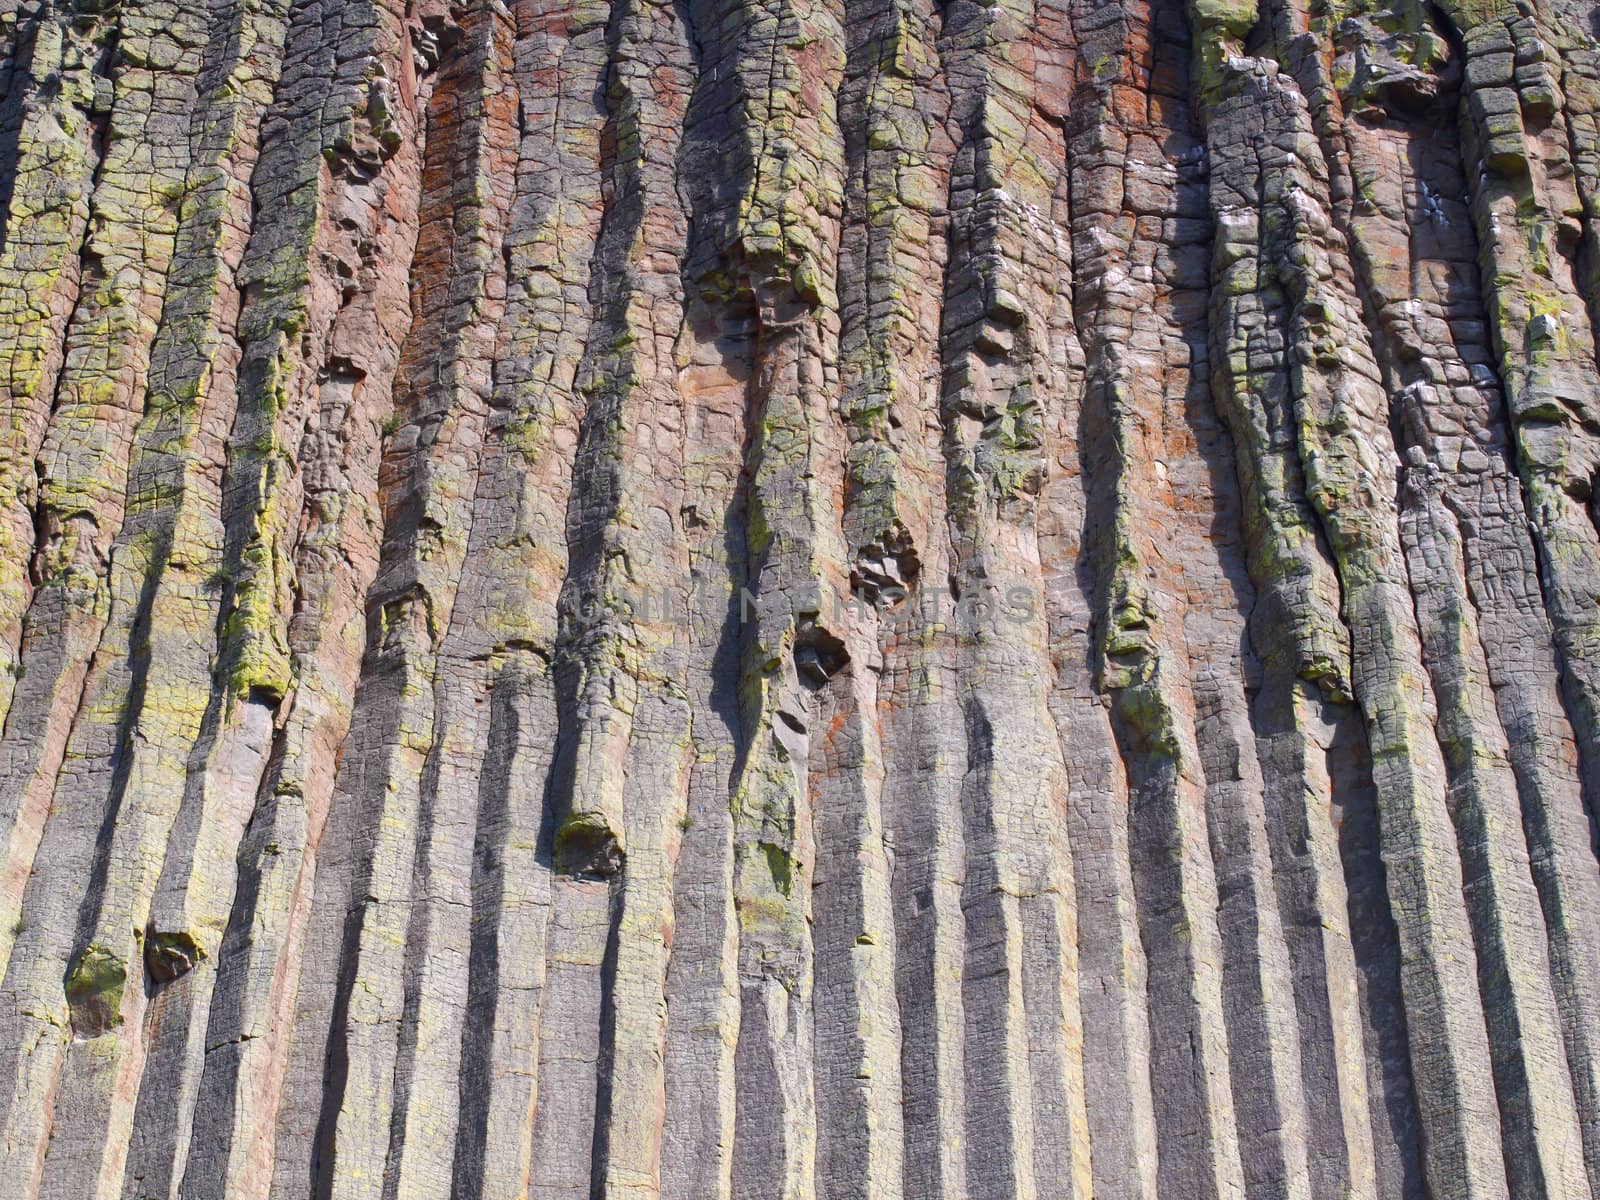 Interesting geological features of Devils Tower National Monument in Wyoming.